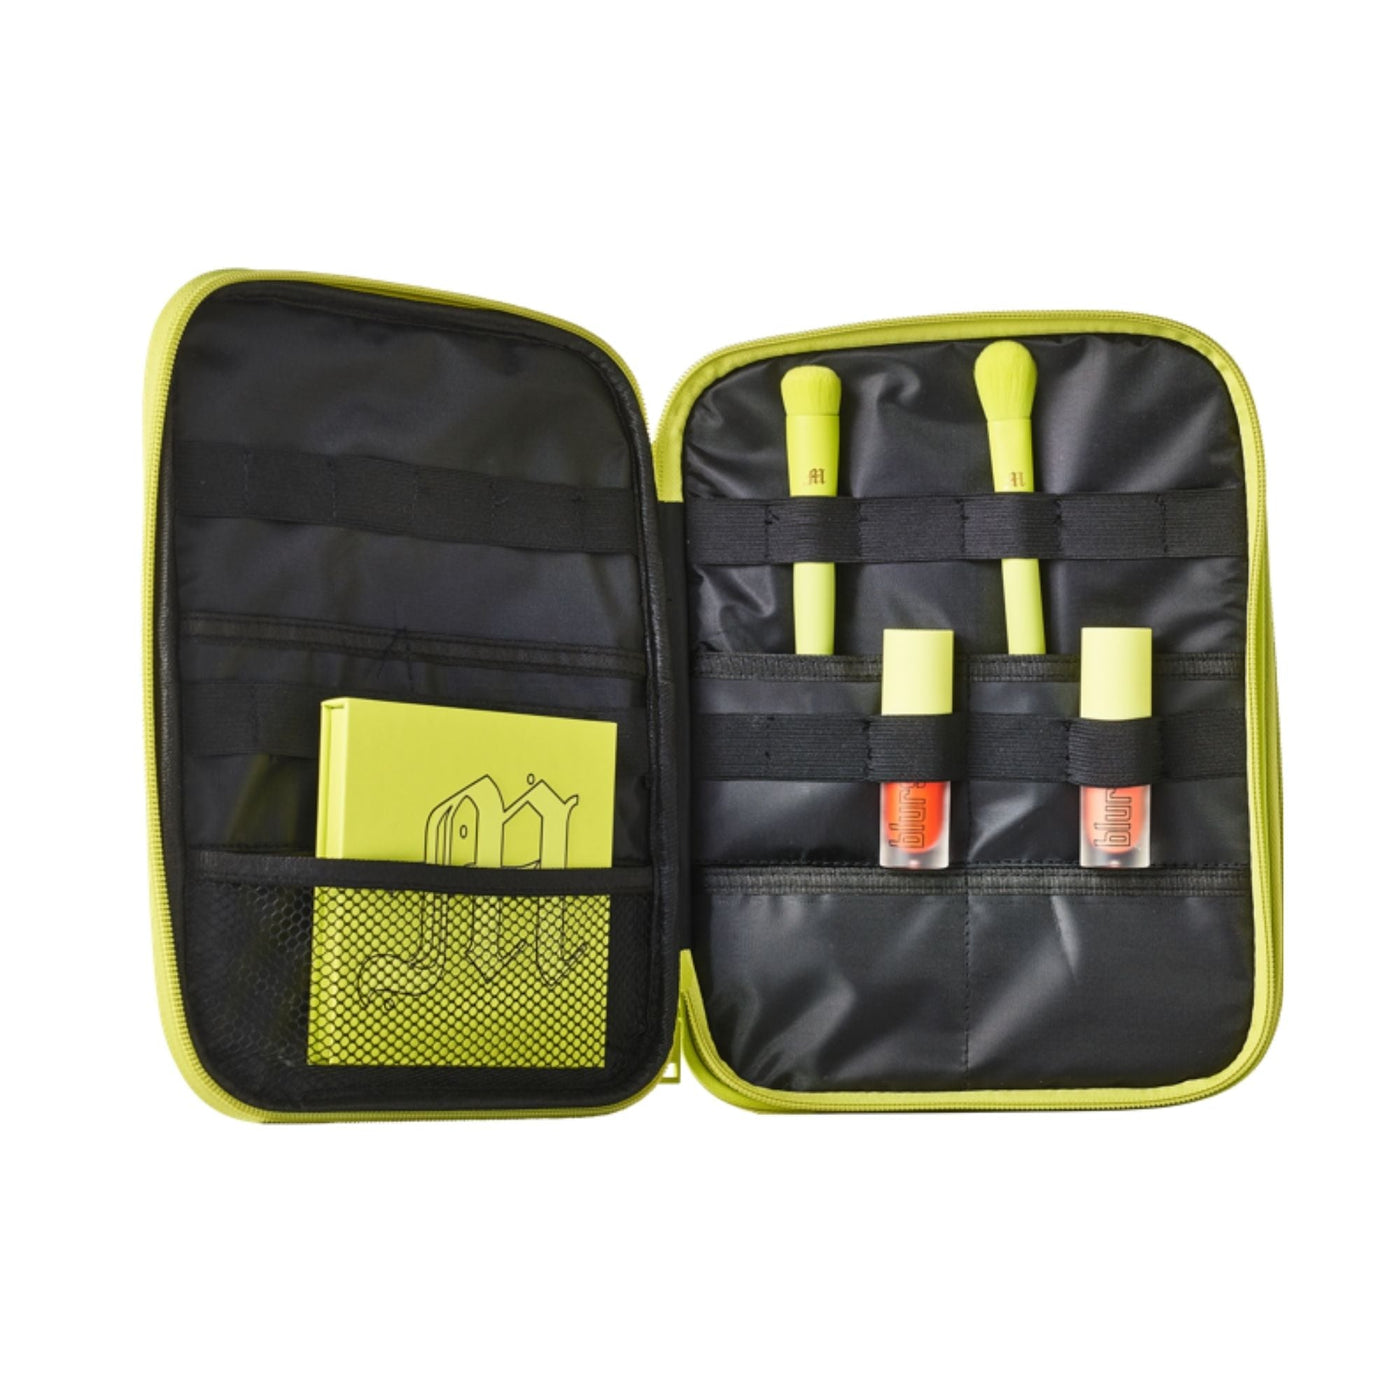 Made by Mitchell - Brush/Pencil Organiser Case